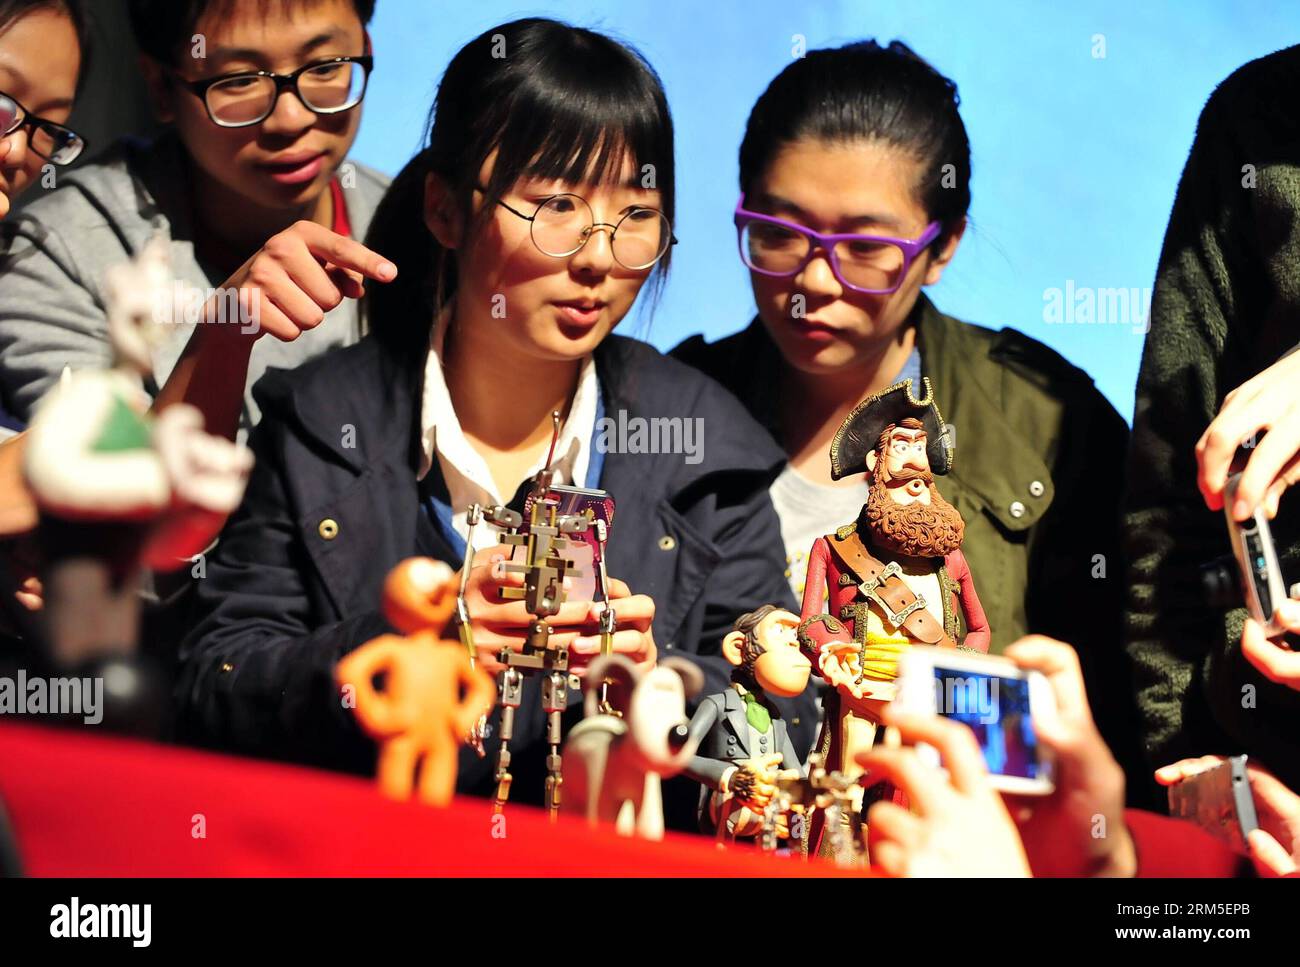 Bildnummer: 60641595  Datum: 26.10.2013  Copyright: imago/Xinhua (131026) -- BEIJING, Oct. 26, 2013 (Xinhua) -- Students look at model figures used by Wallace & Gromit, Aardman Animations in Britain to make stop-motion animation at the 8th China International Student Animation Festival in Beijing, capital of China, Oct. 26, 2013. The three-day festival kicked off at the Communication University of China Saturday. (Xinhua/Xiao Xiao)(wjq) CHINA-BEIJING-STUDENT ANIMATION FESTIVAL (CN) PUBLICATIONxNOTxINxCHN People x0x xsk 2013 quer      60641595 Date 26 10 2013 Copyright Imago XINHUA  Beijing OCT Stock Photo